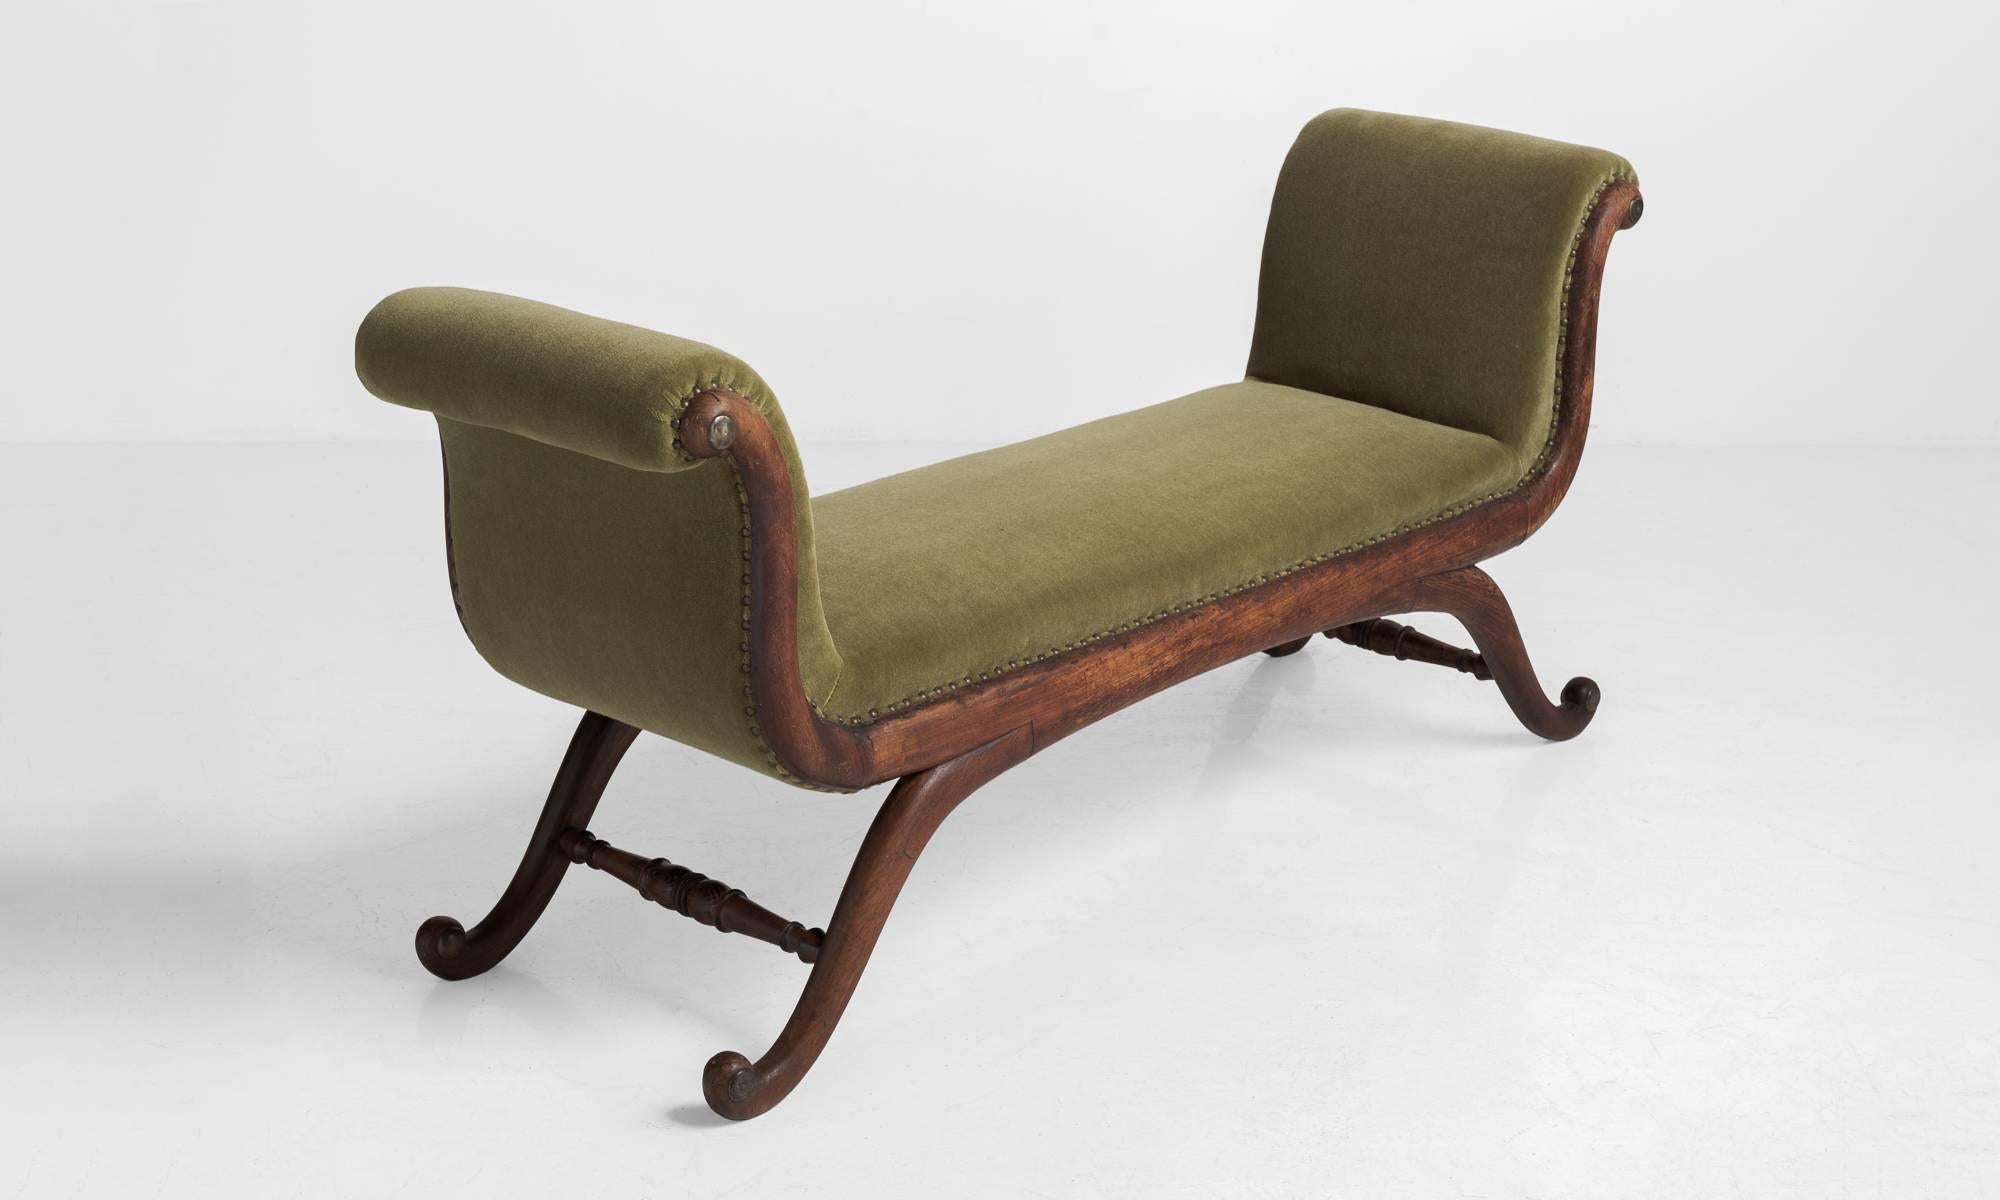 Window bench, circa 1880.

Elegant form, newly upholstered in Maharam mohair fabric.